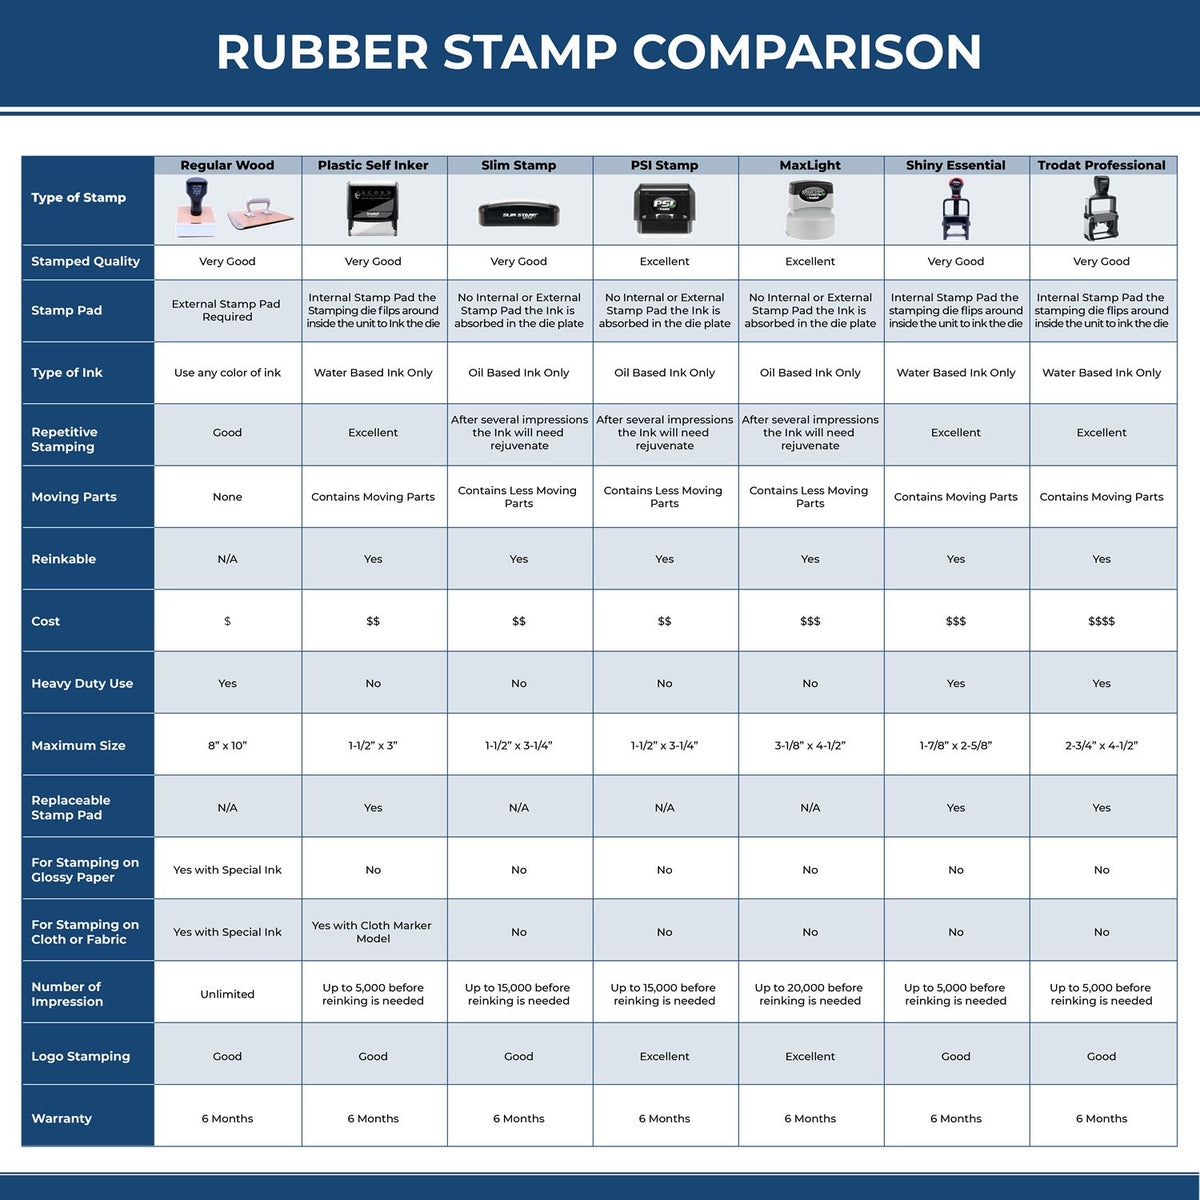 A comparison chart for the different types of mount models available for the Self-Inking Guam Geologist Stamp